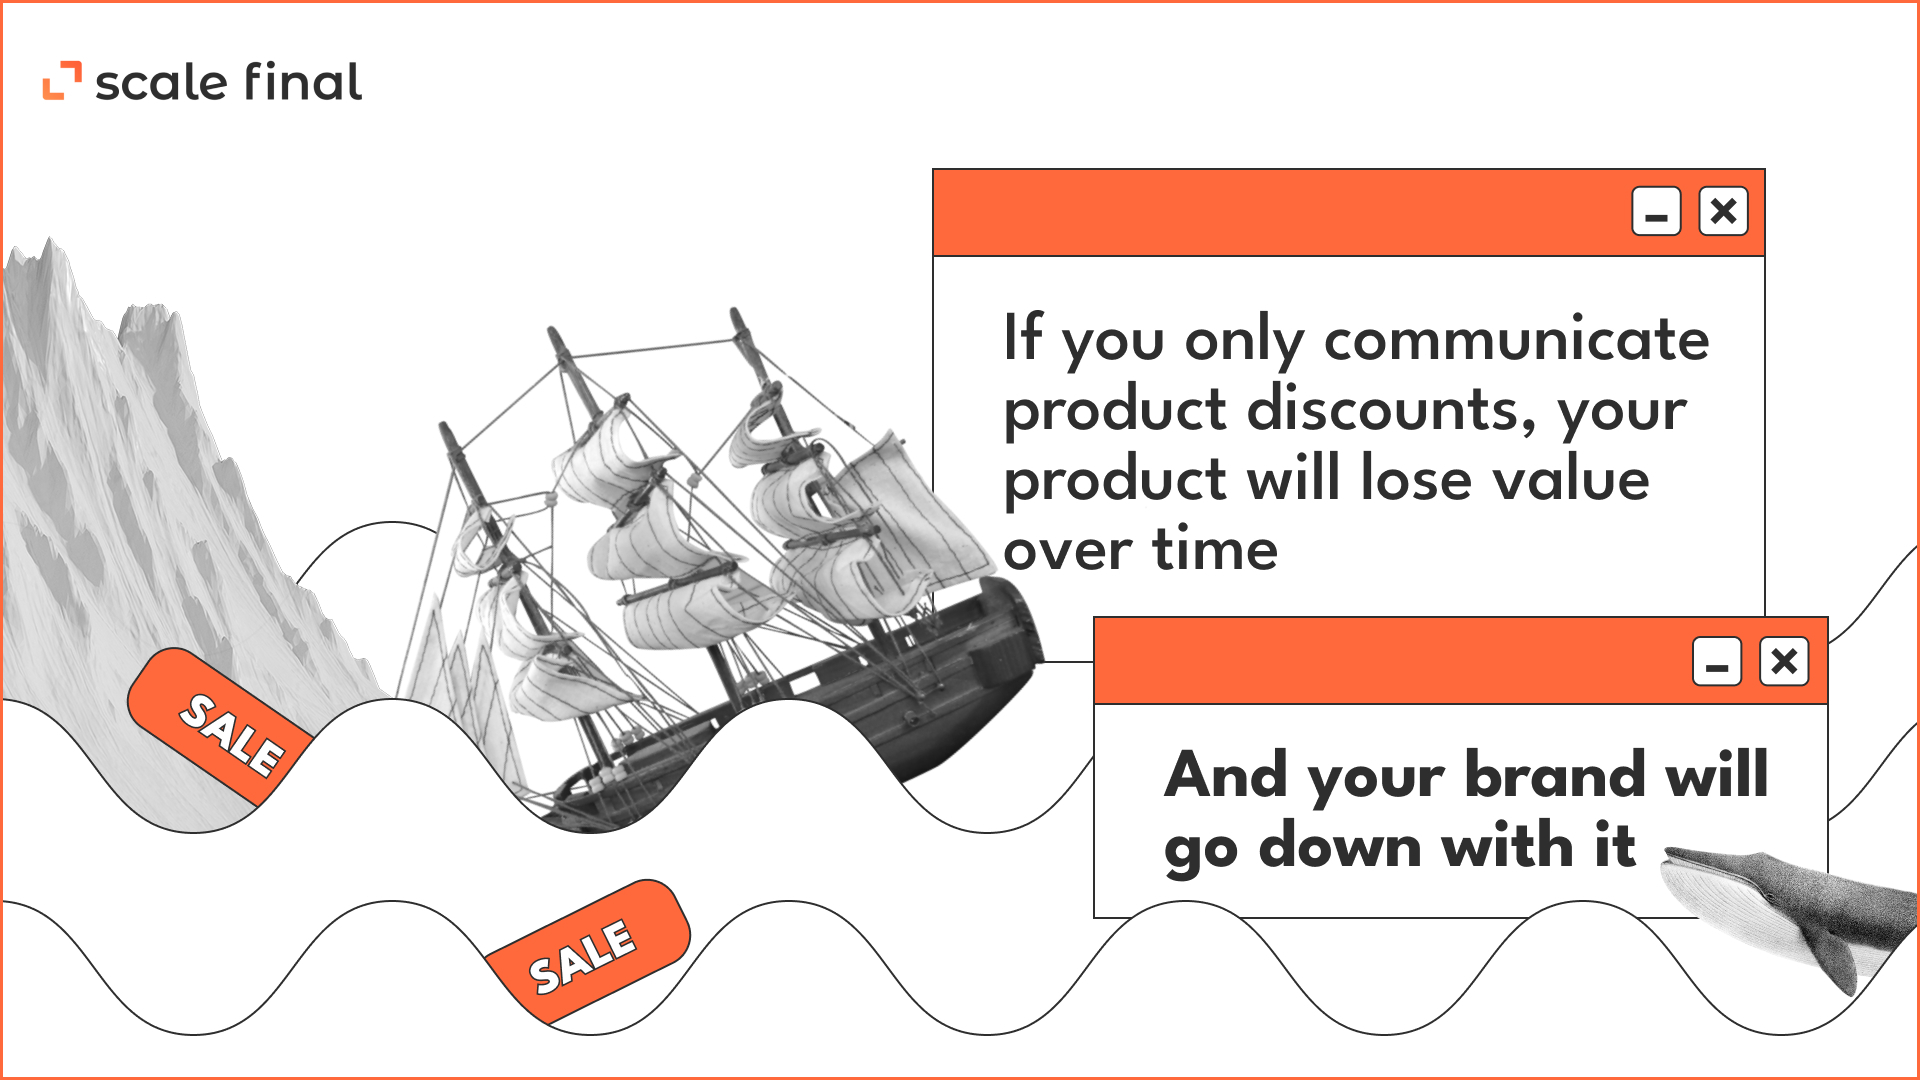 If you only communicate product discounts, your product will lose value over time.